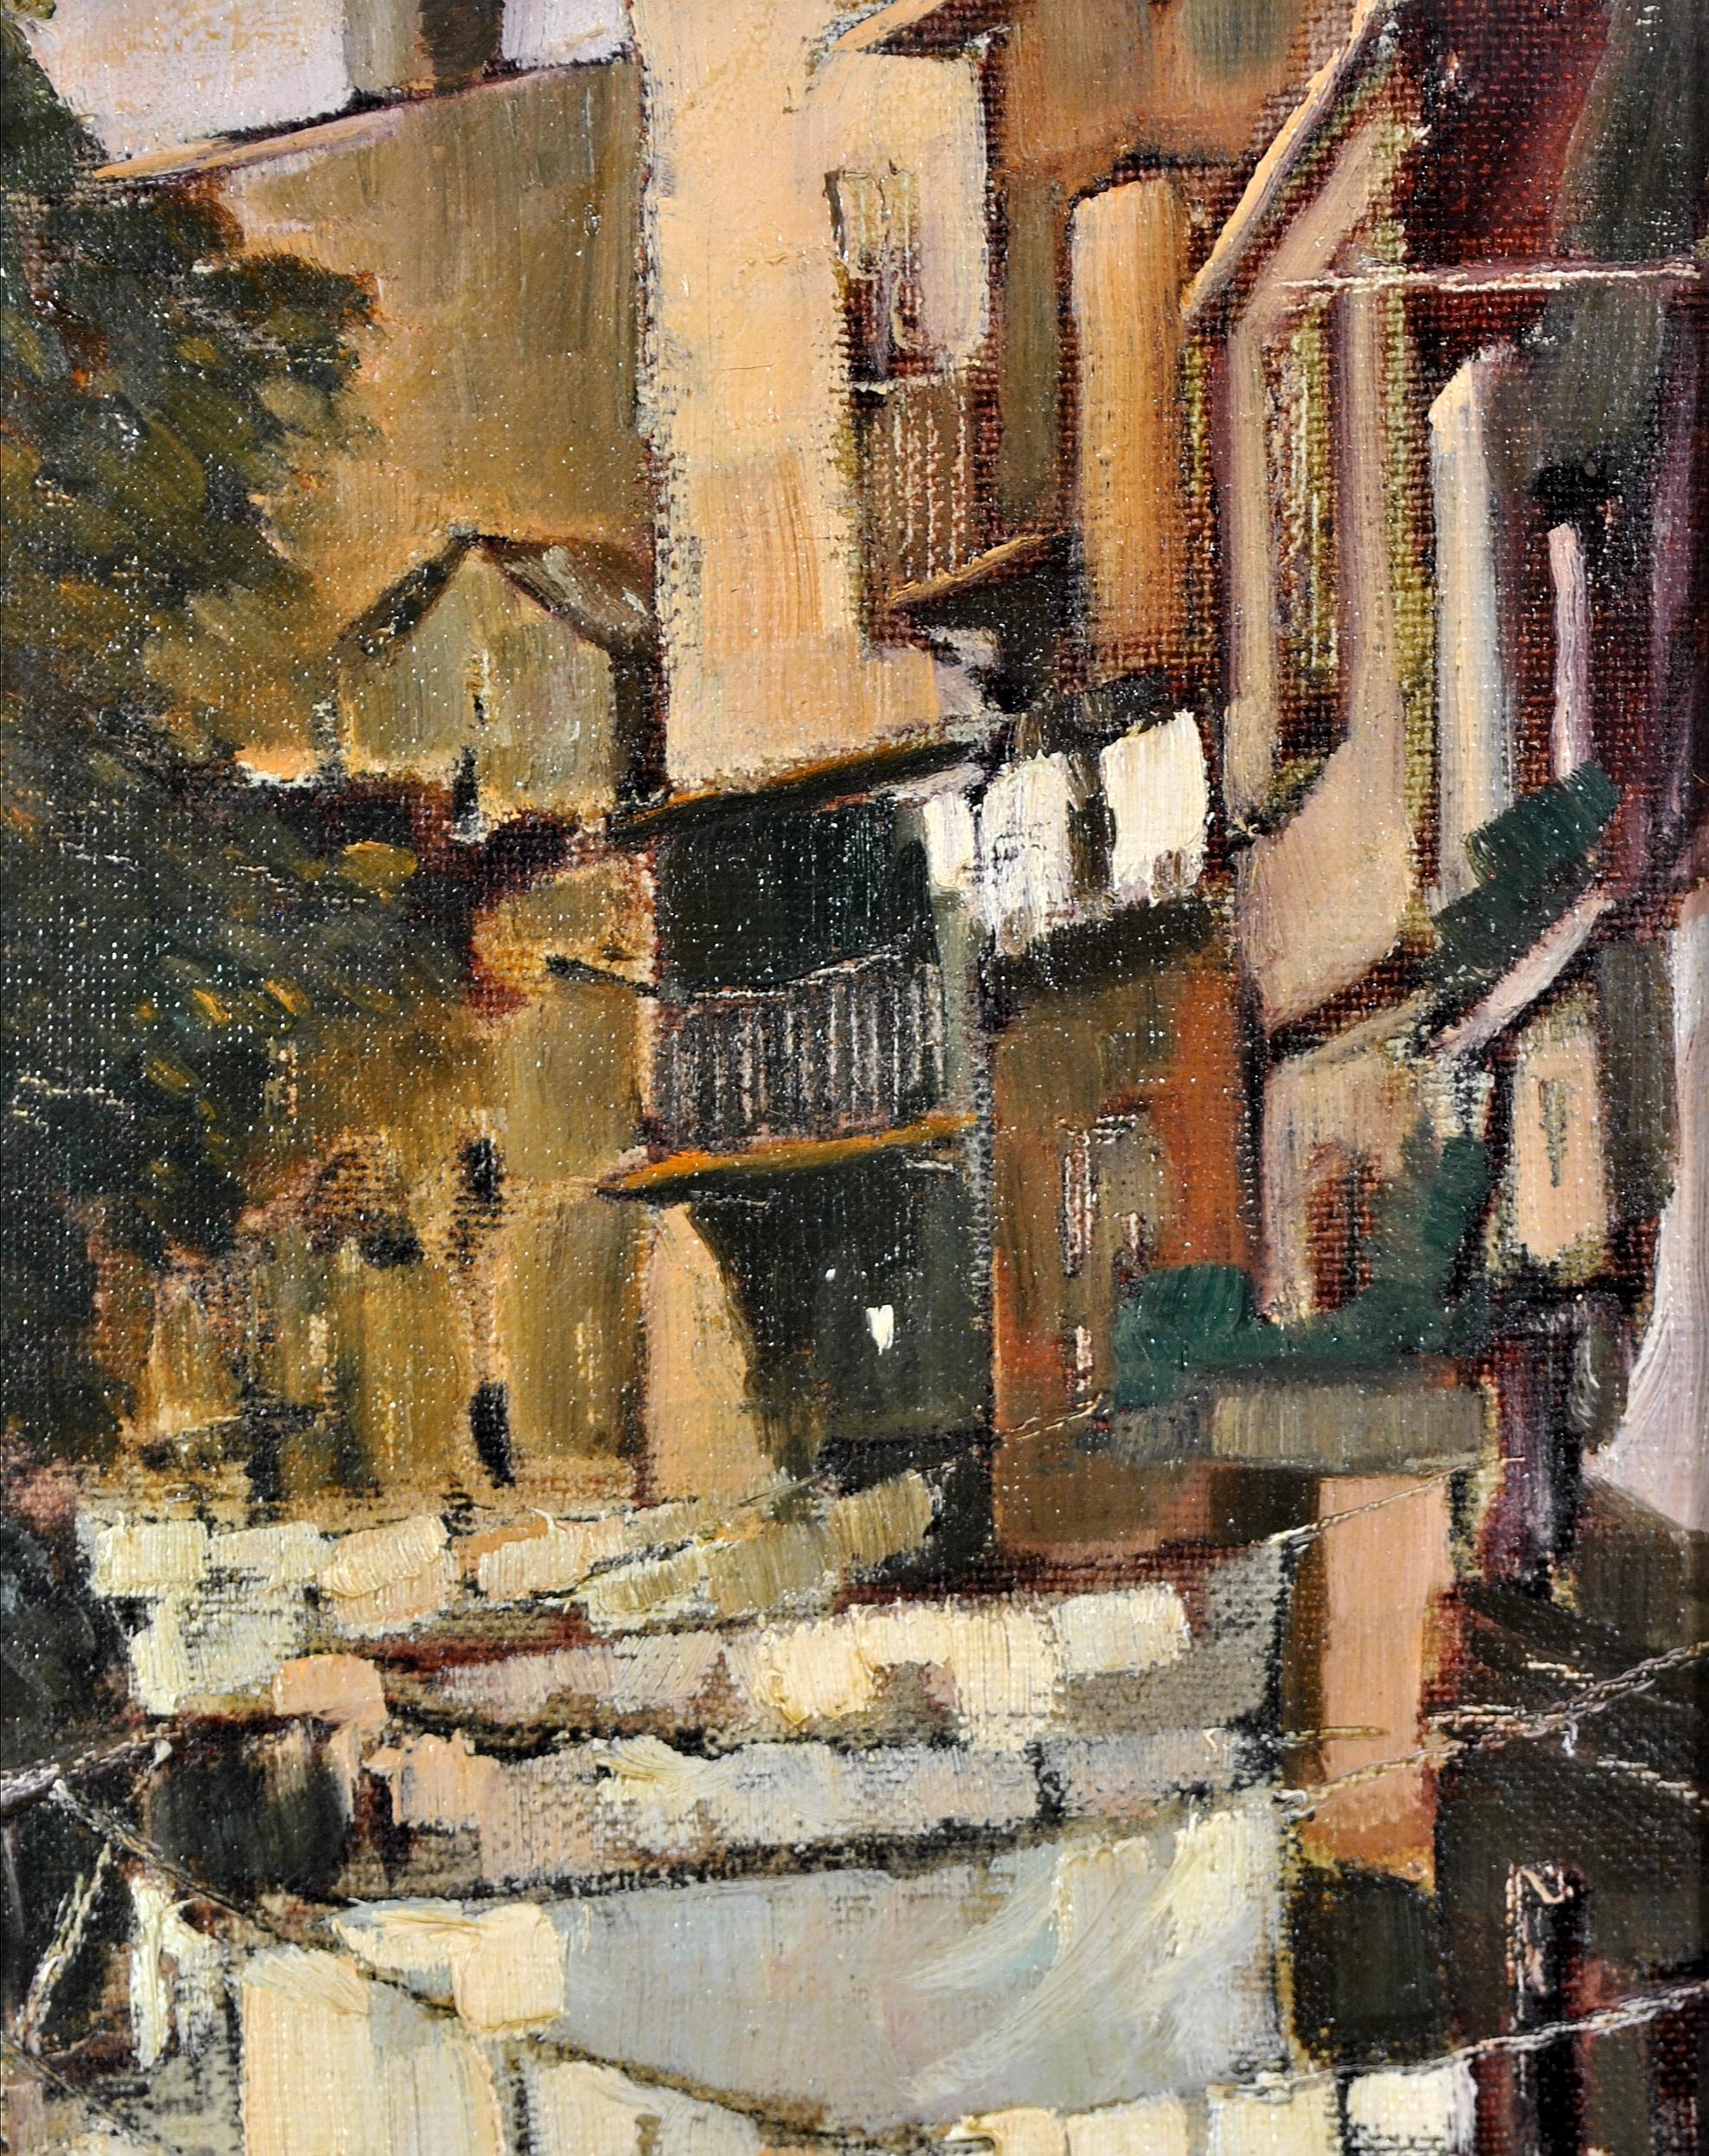 Villefranche - Washing on the Lines French Riviera South of France Oil Painting For Sale 1